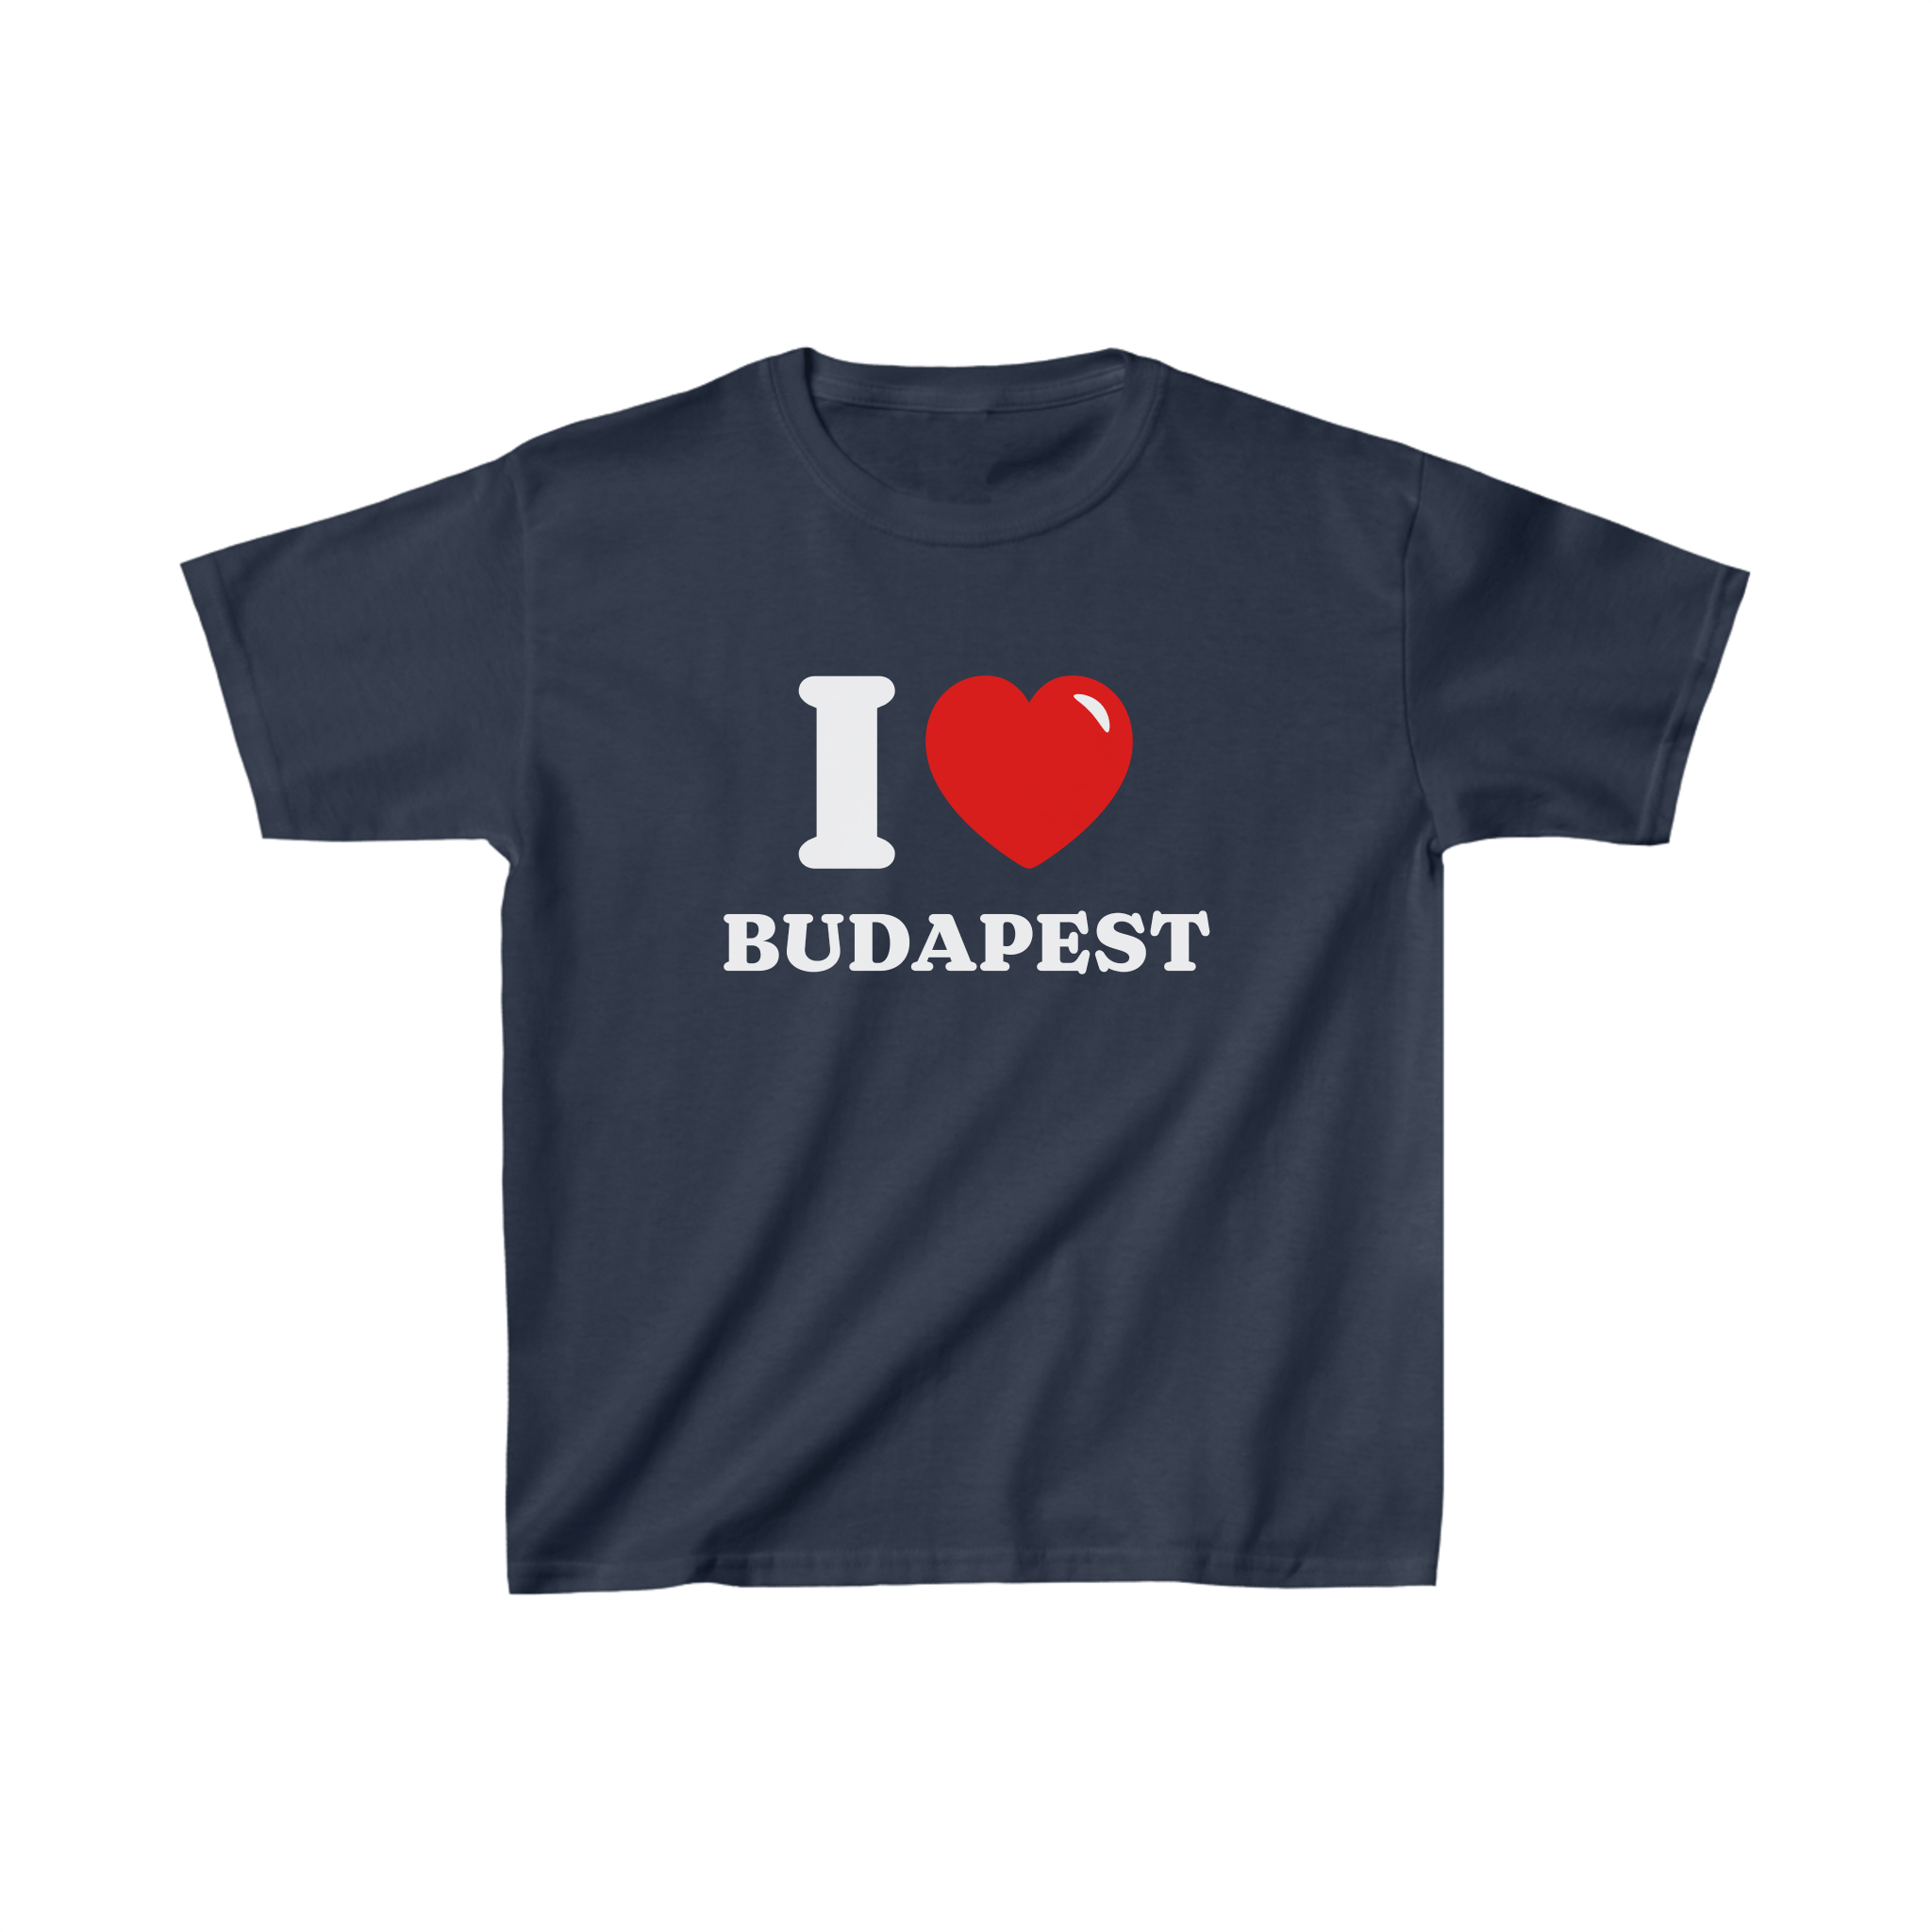 'I love Budapest' baby tee - In Print We Trust